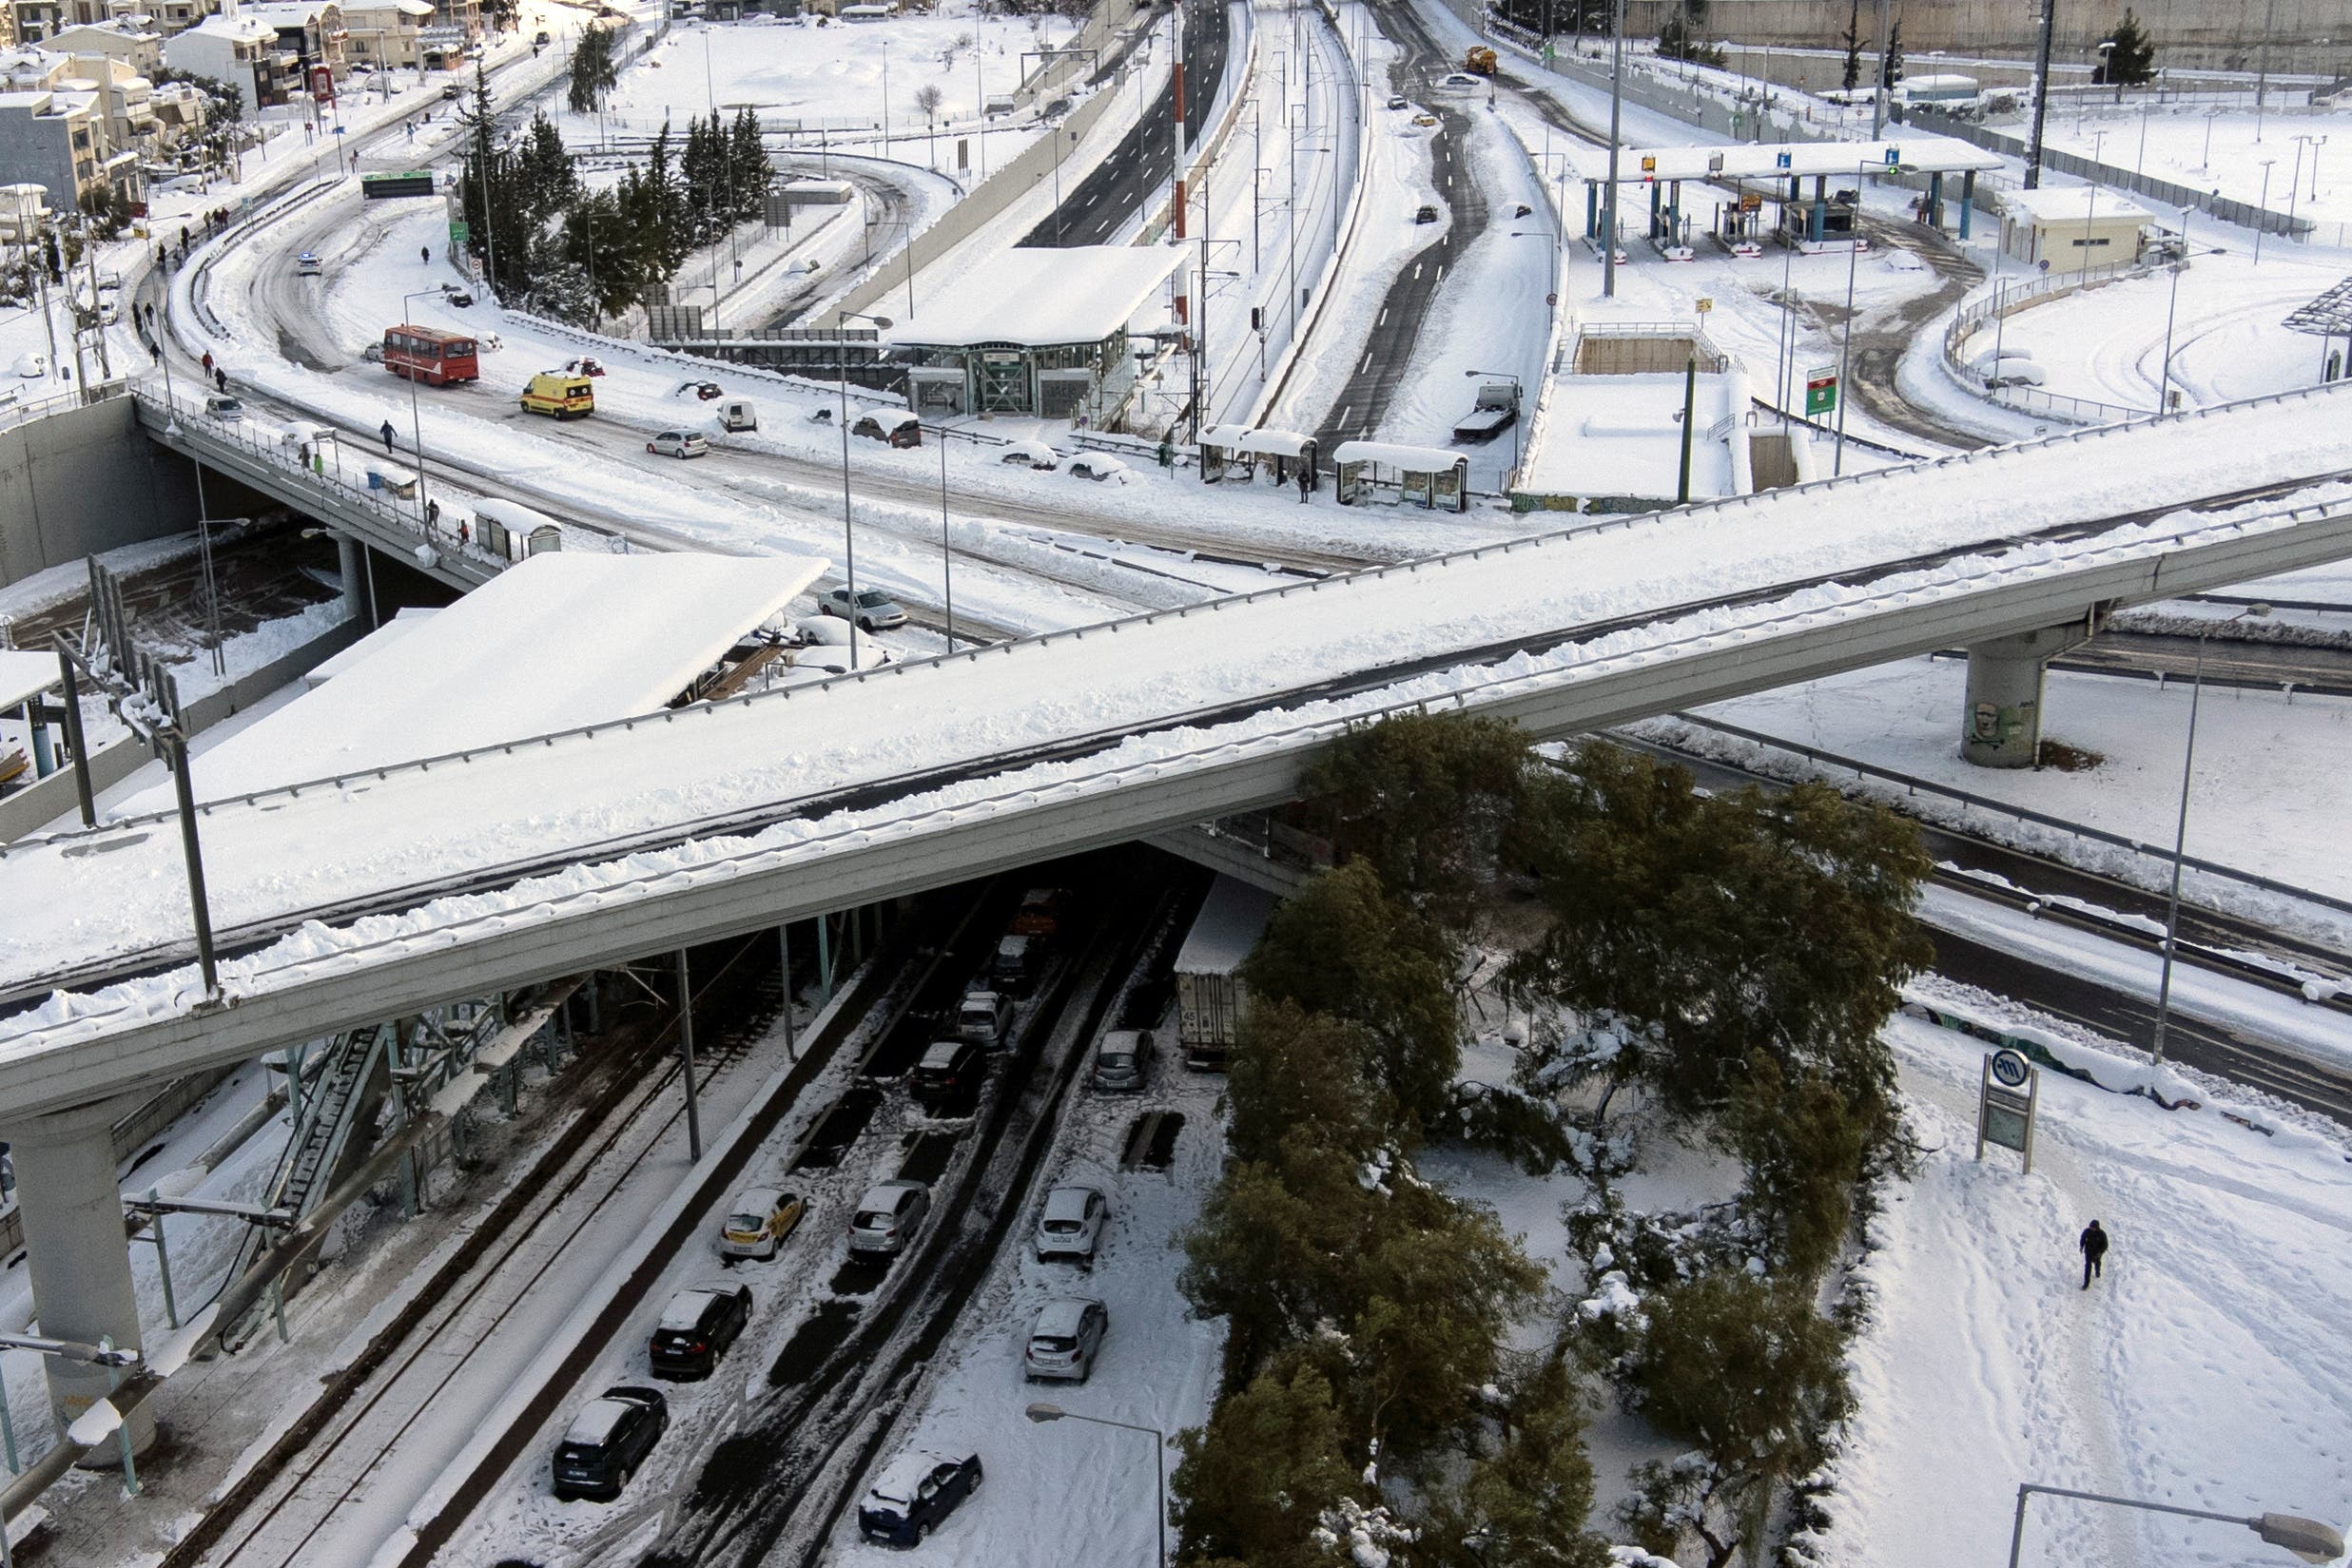 Abandoned vehicles are covered in snow on the Attiki Odos motorway, following heavy snowfall in Athens, Greece, January 25, 2022. (Reuters)